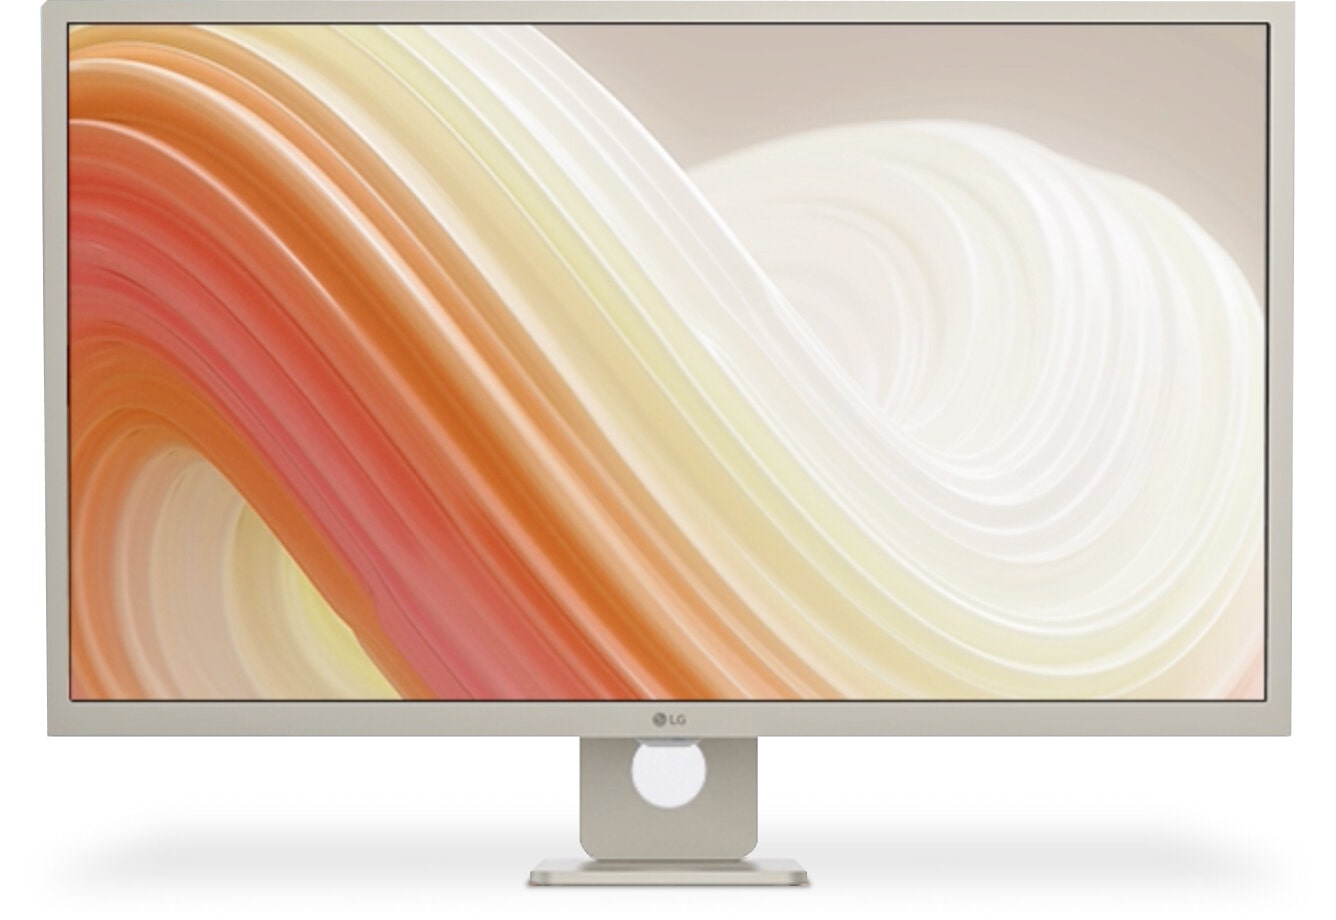 The LG MyView Smart Monitor cycles between a white, pink, olive and black exterior, showing style that fits any space.